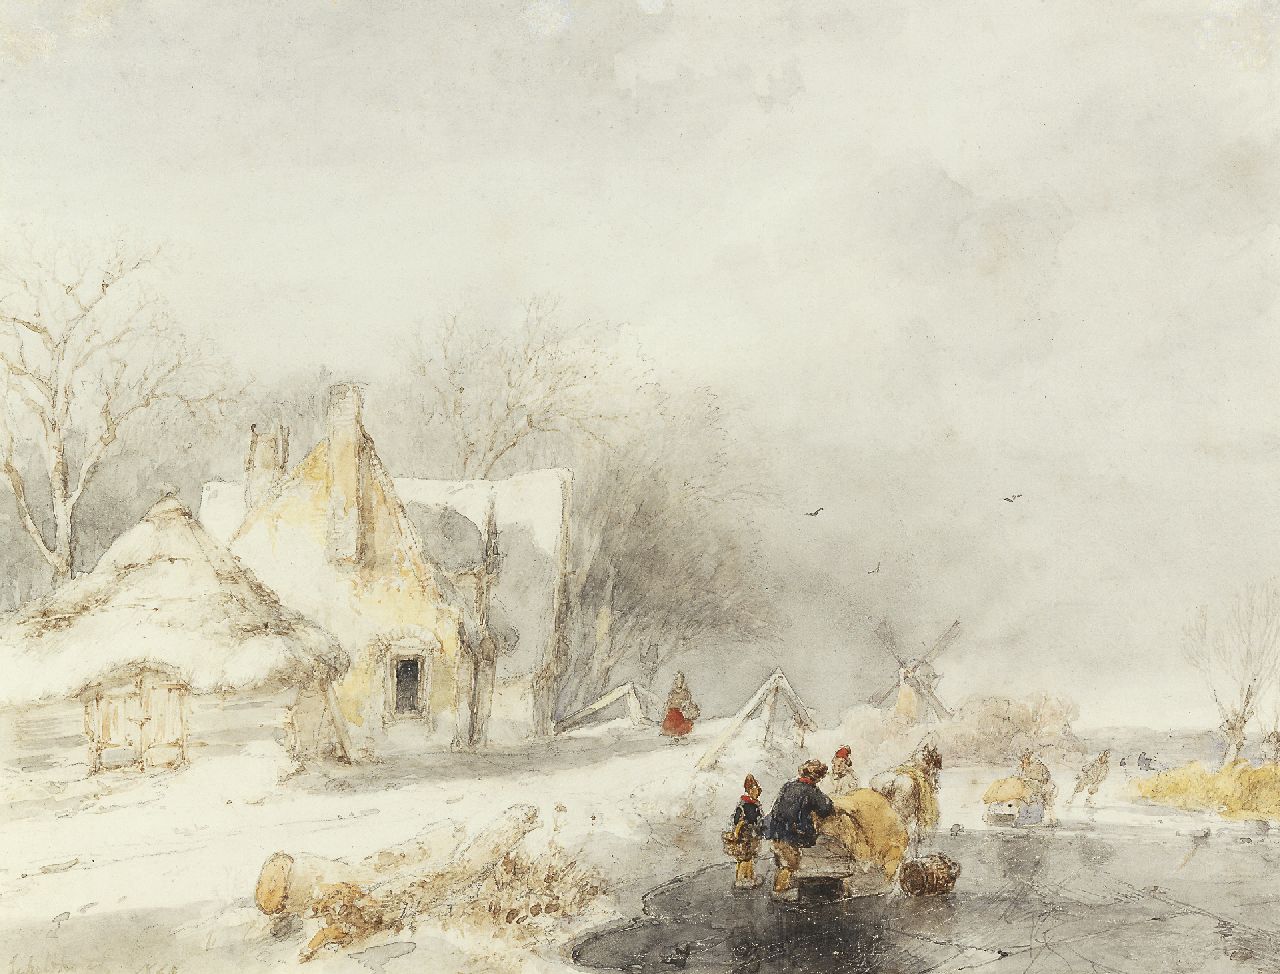 Schelfhout A.  | Andreas Schelfhout, Skaters in a frozen winter landscape, watercolour on paper 20.9 x 26.4 cm, signed l.l. and painted 1848